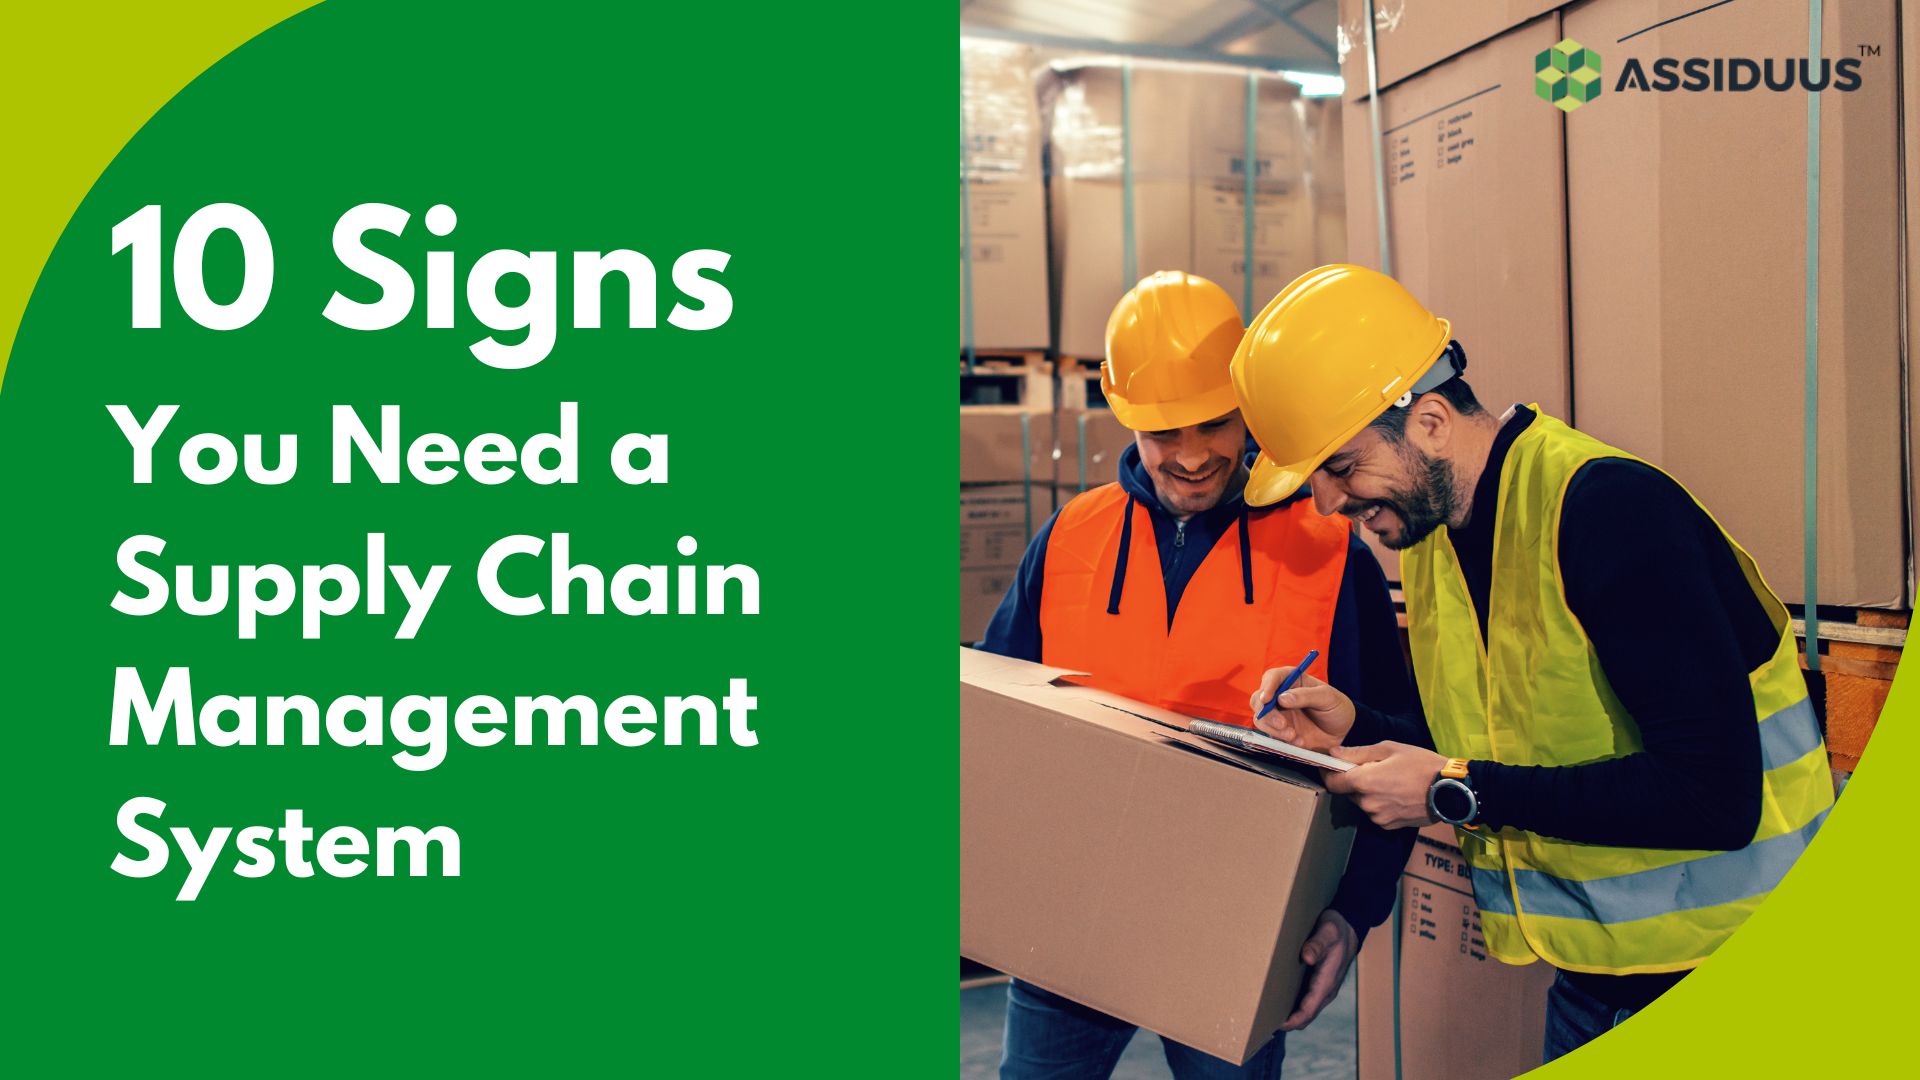 10 Signs You Need a Supply Chain Management System